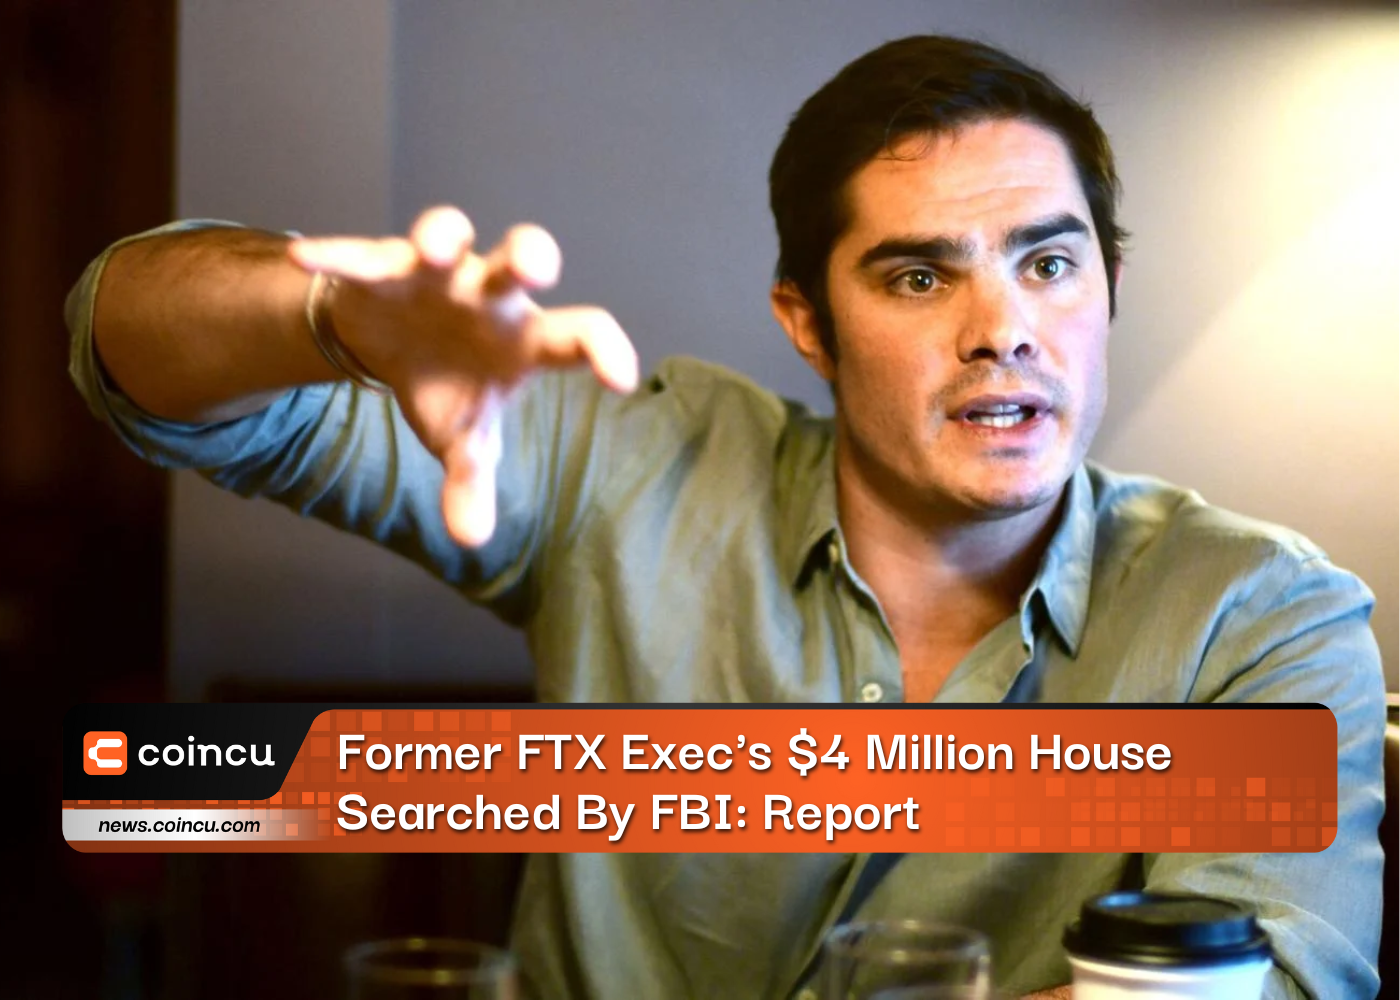 Former FTX Exec's $4 Million House Searched By FBI: Report